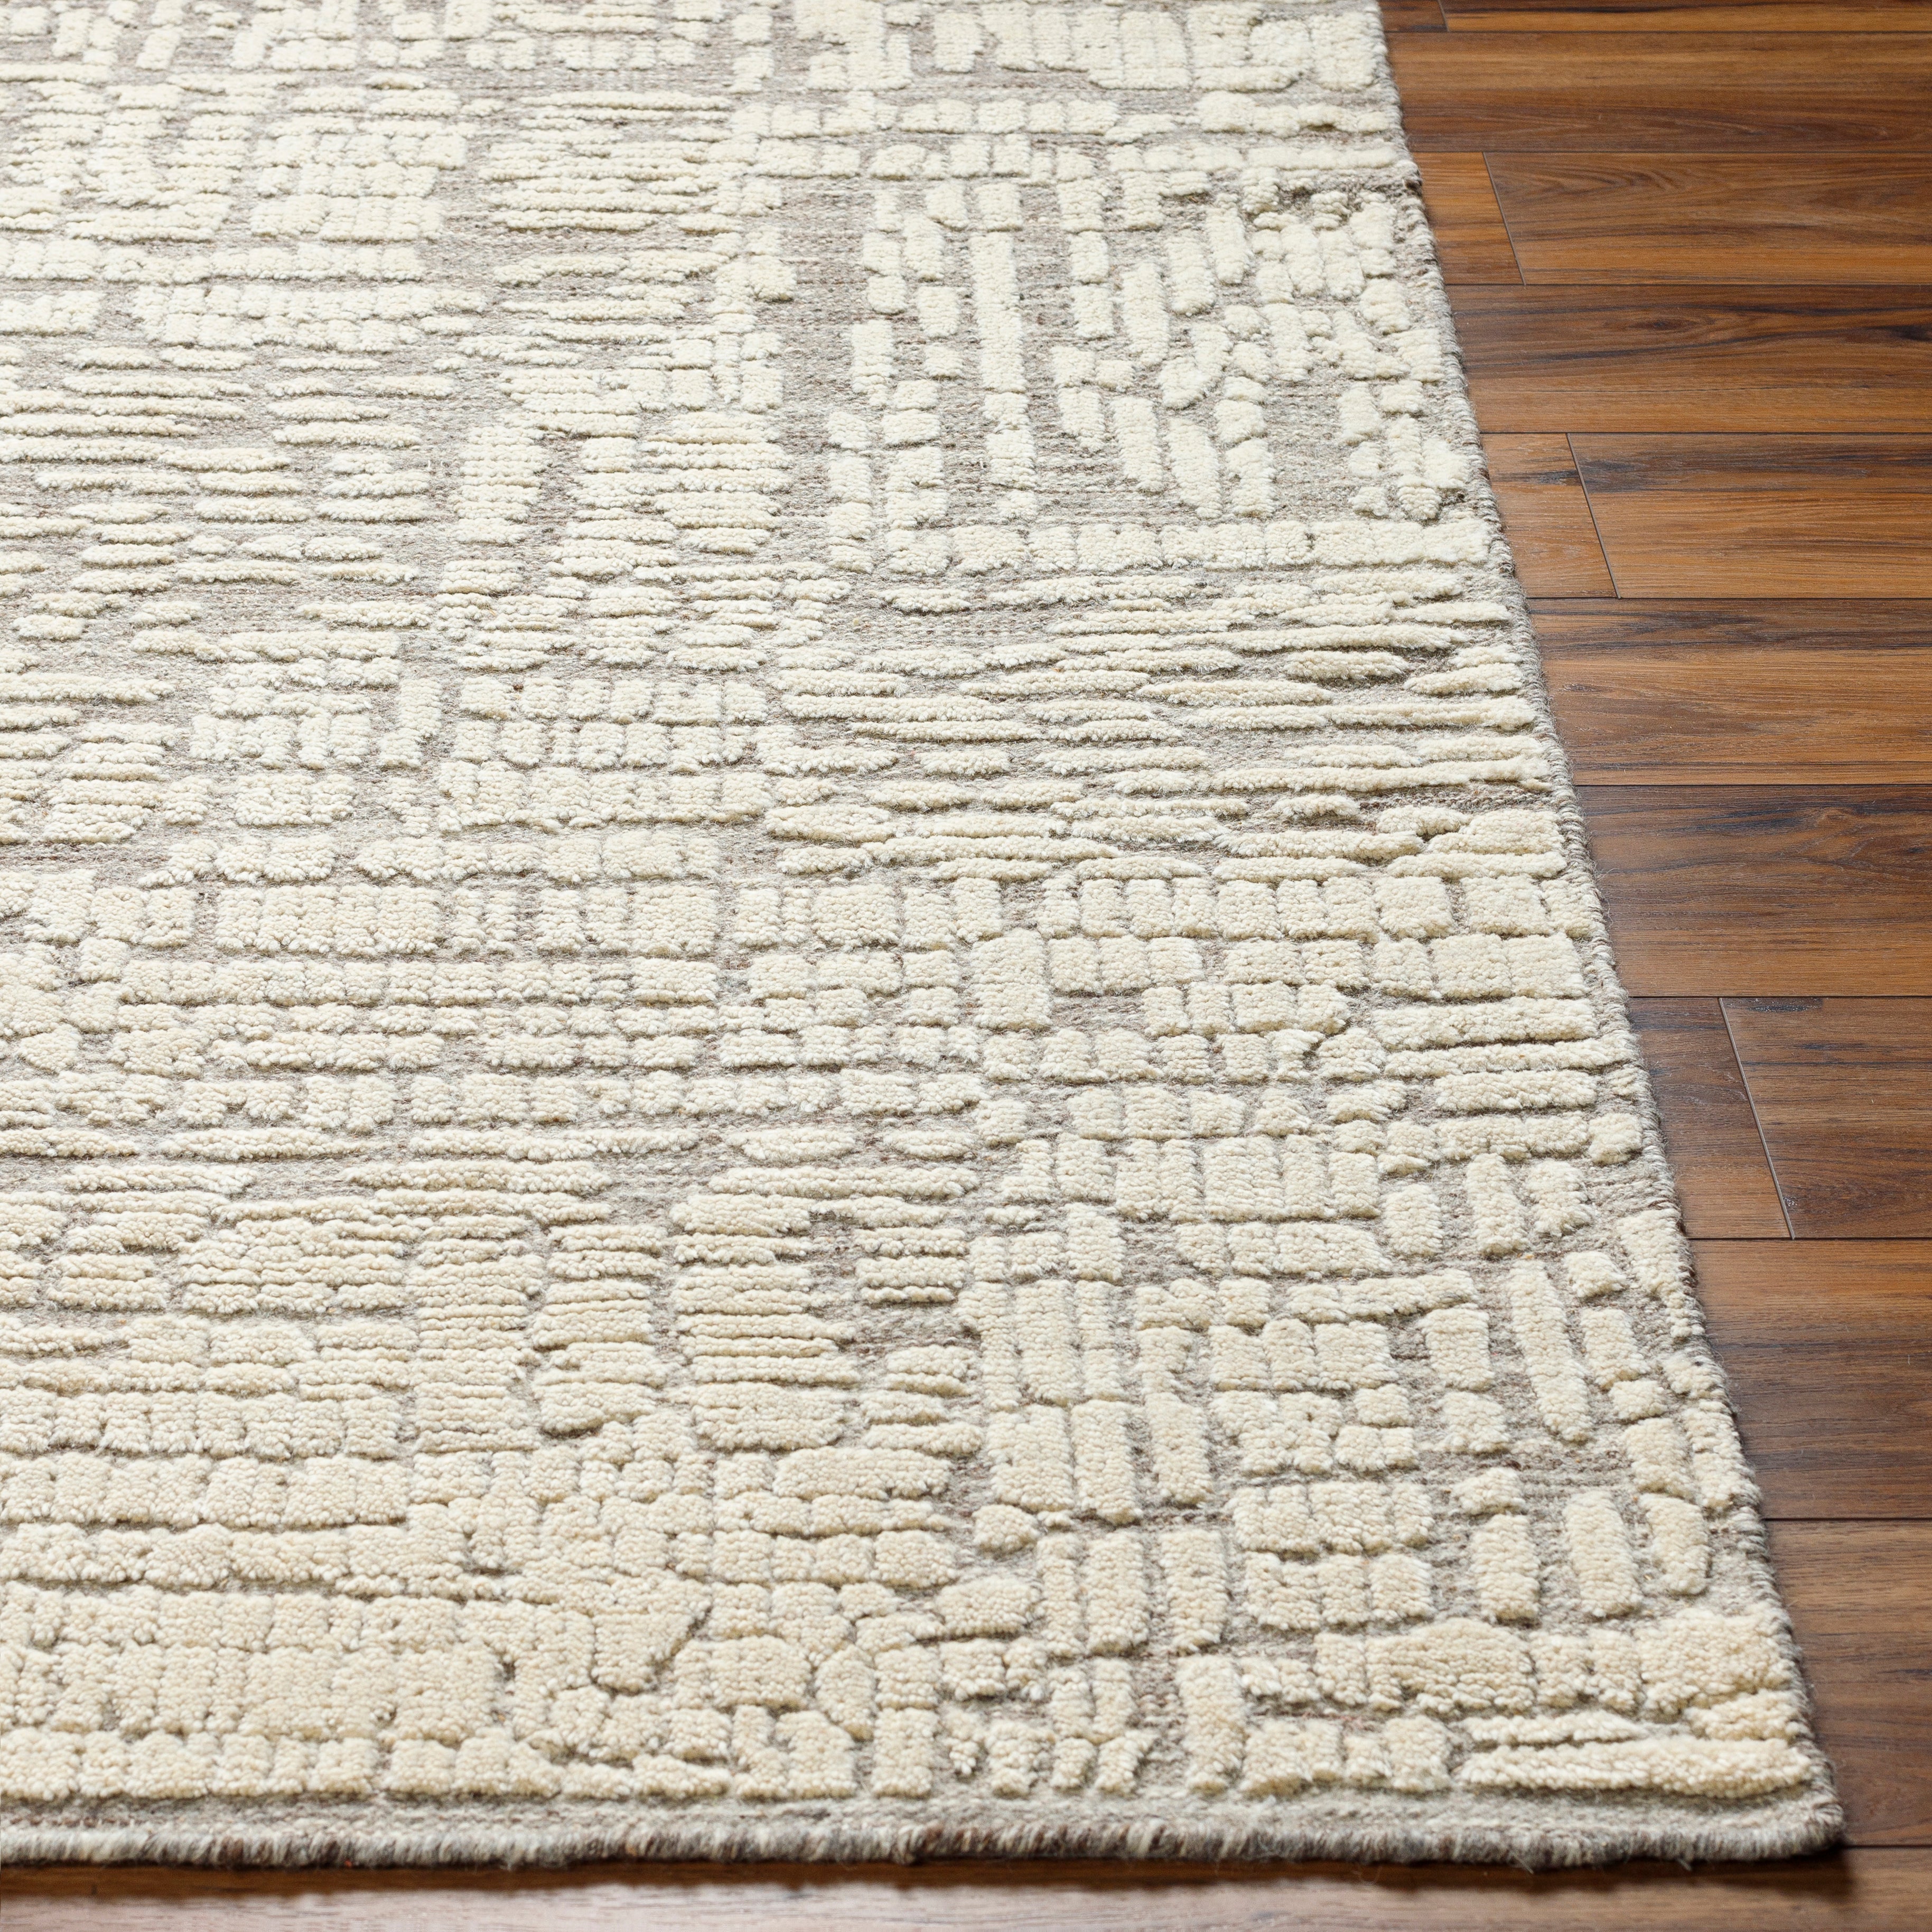 Introducing the Tunus Molly rug, hand-knotted from 100% wool and woven into an abstract, geometric pattern. Featuring taupe and ivory colors, this stylish and warm rug brings modern sophistication to any space. Amethyst Home provides interior design, new home construction design consulting, vintage area rugs, and lighting in the Kansas City metro area.